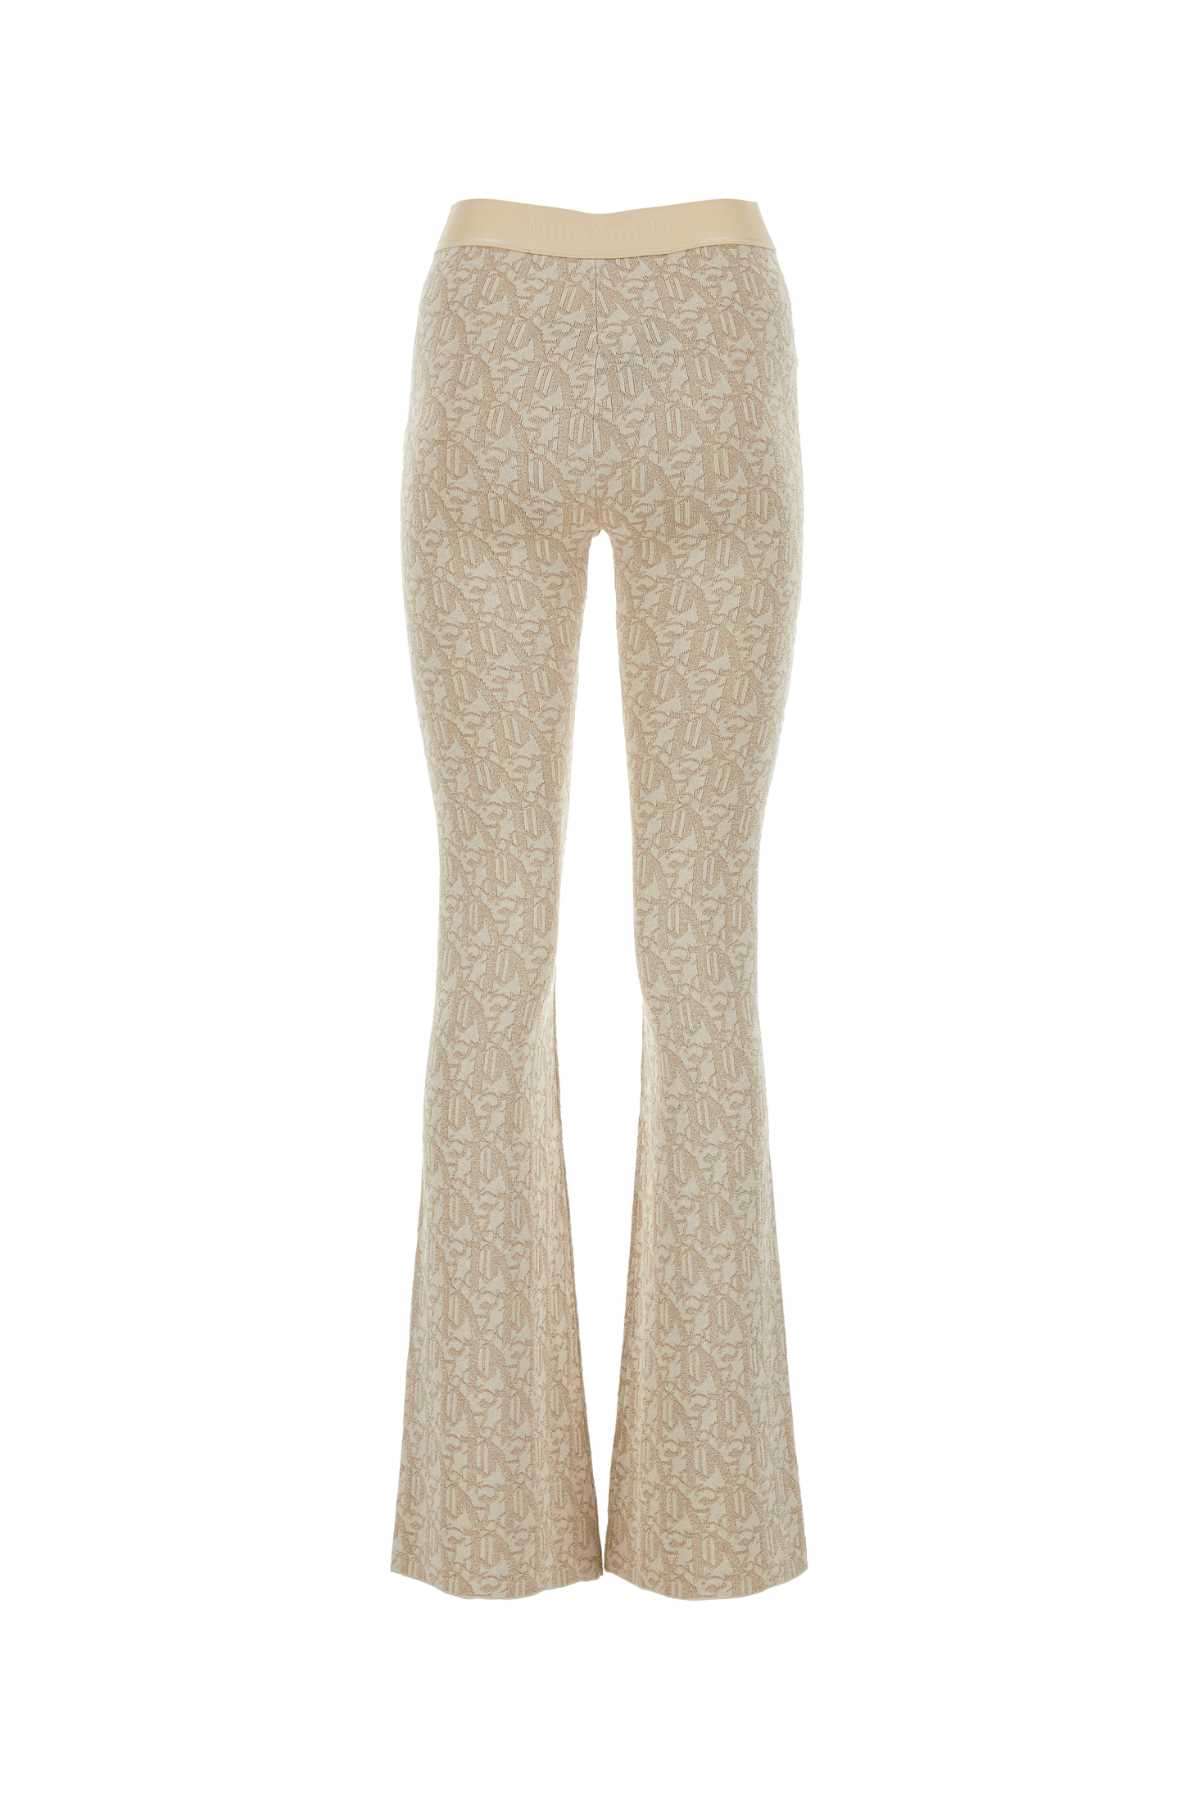 PALM ANGELS EMBROIDERED VISCOSE BLEND PANT